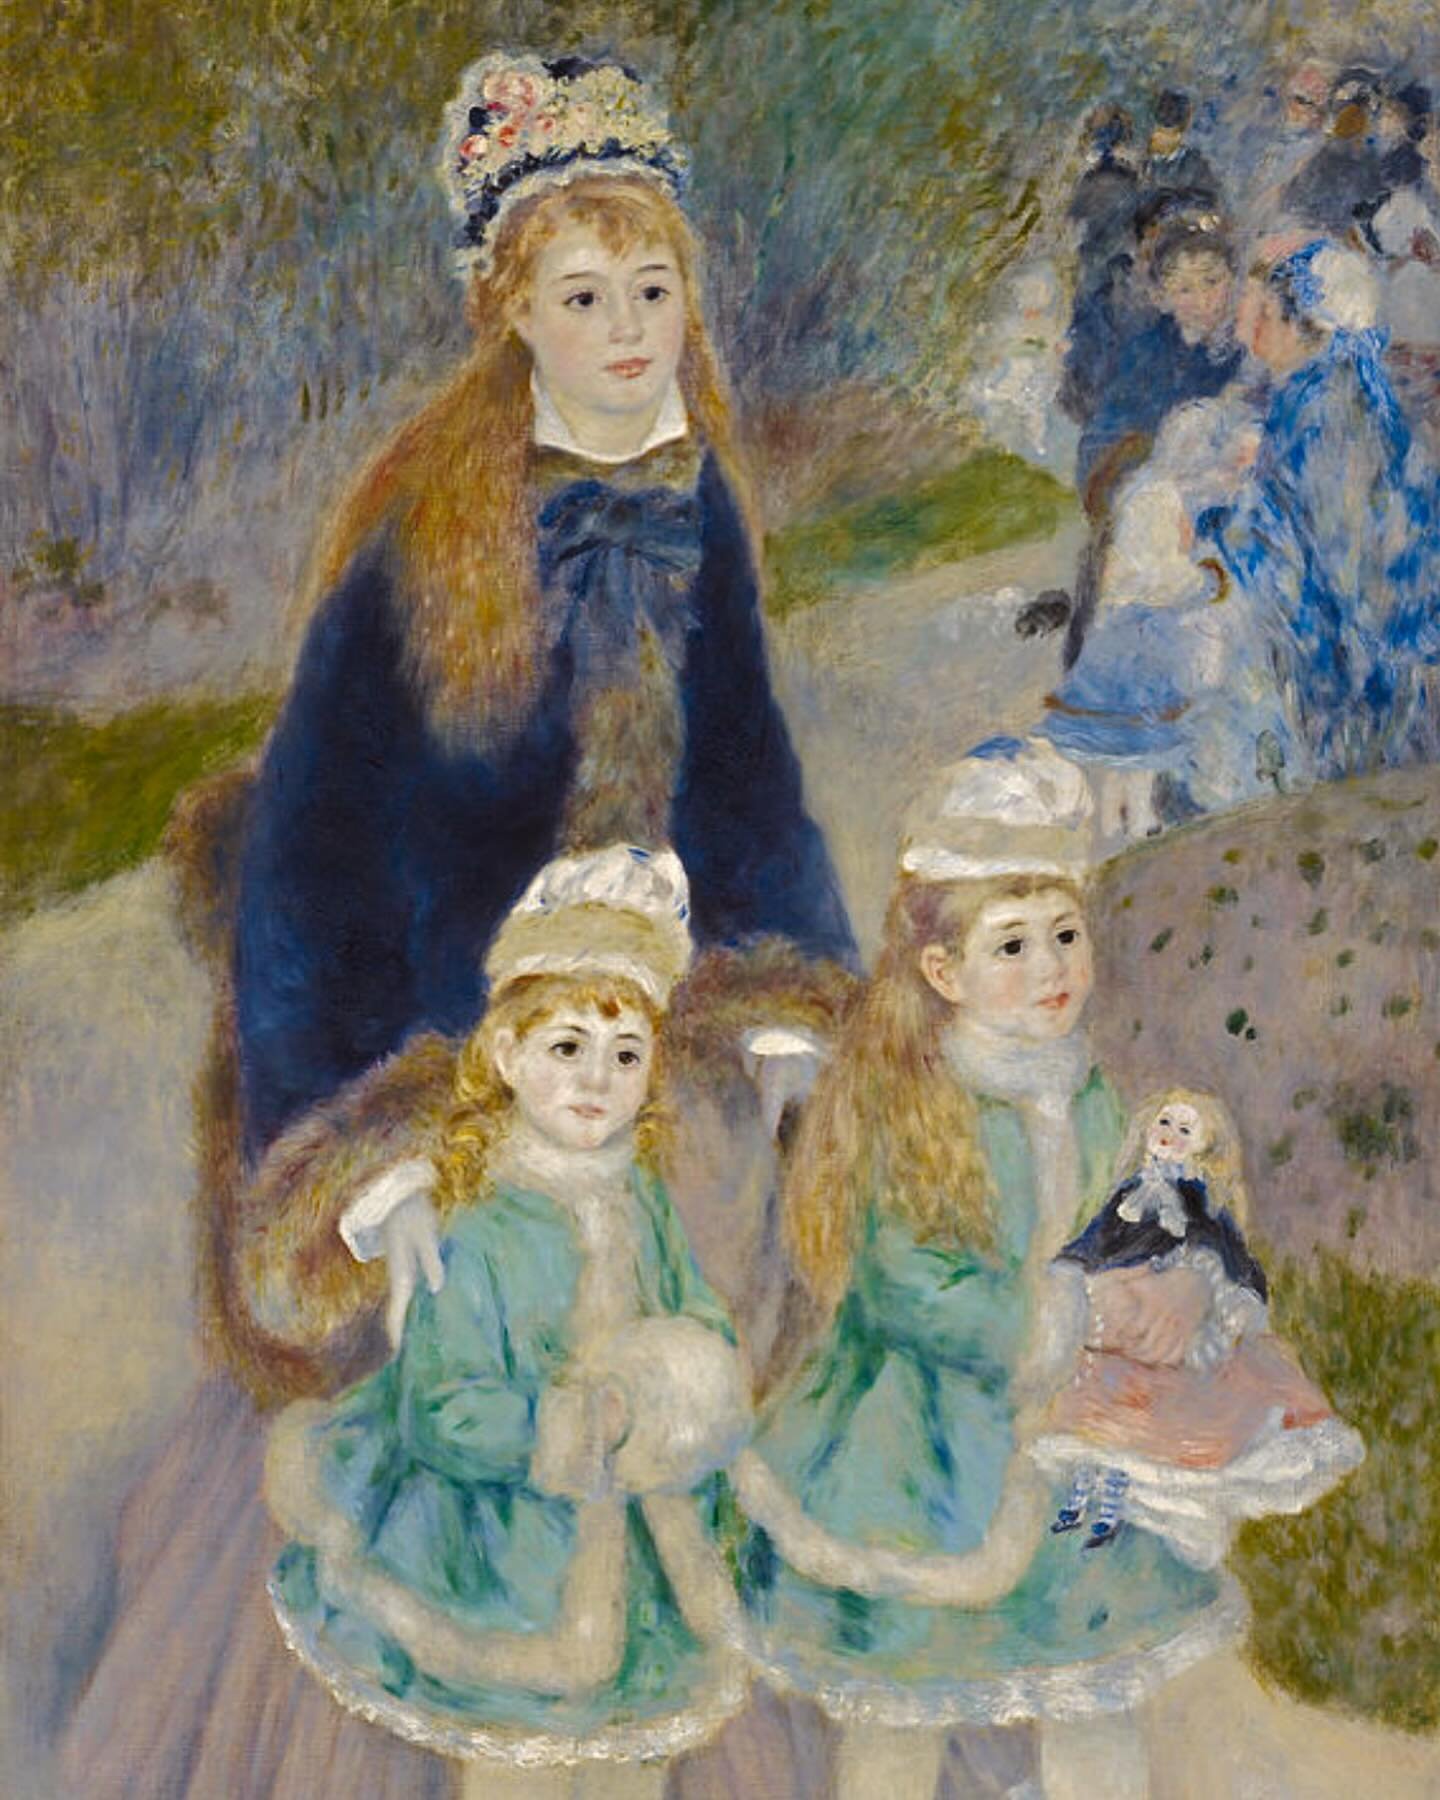 Detail of La Promenade, 1876 Pierre-Auguste Renoir. 🍃🌺 Happy Mother&rsquo;s Day weekend to all!